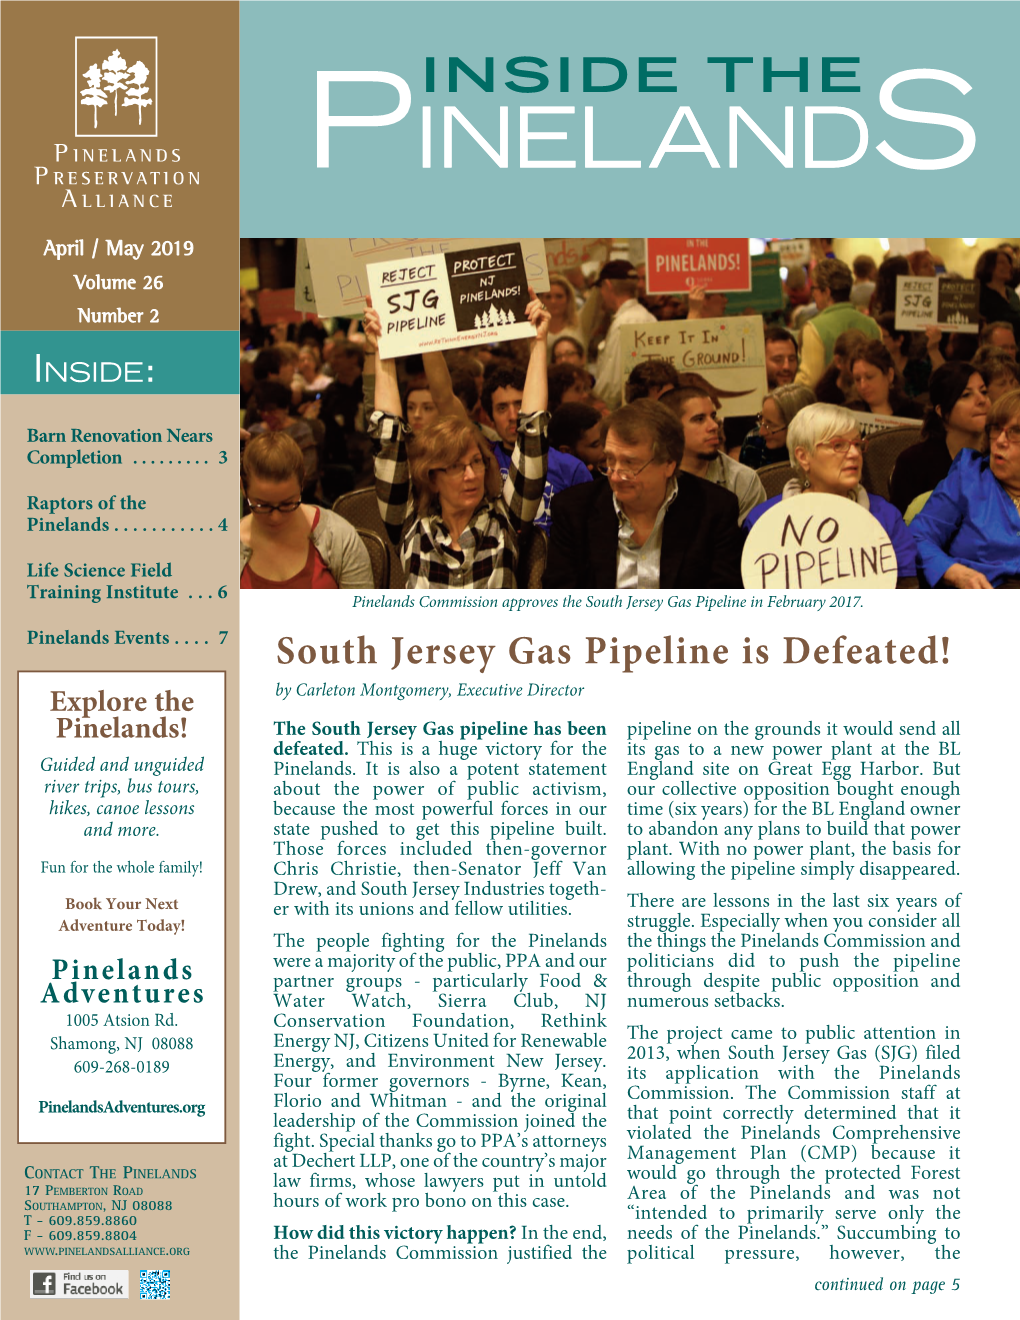 South Jersey Gas Pipeline Is Defeated!